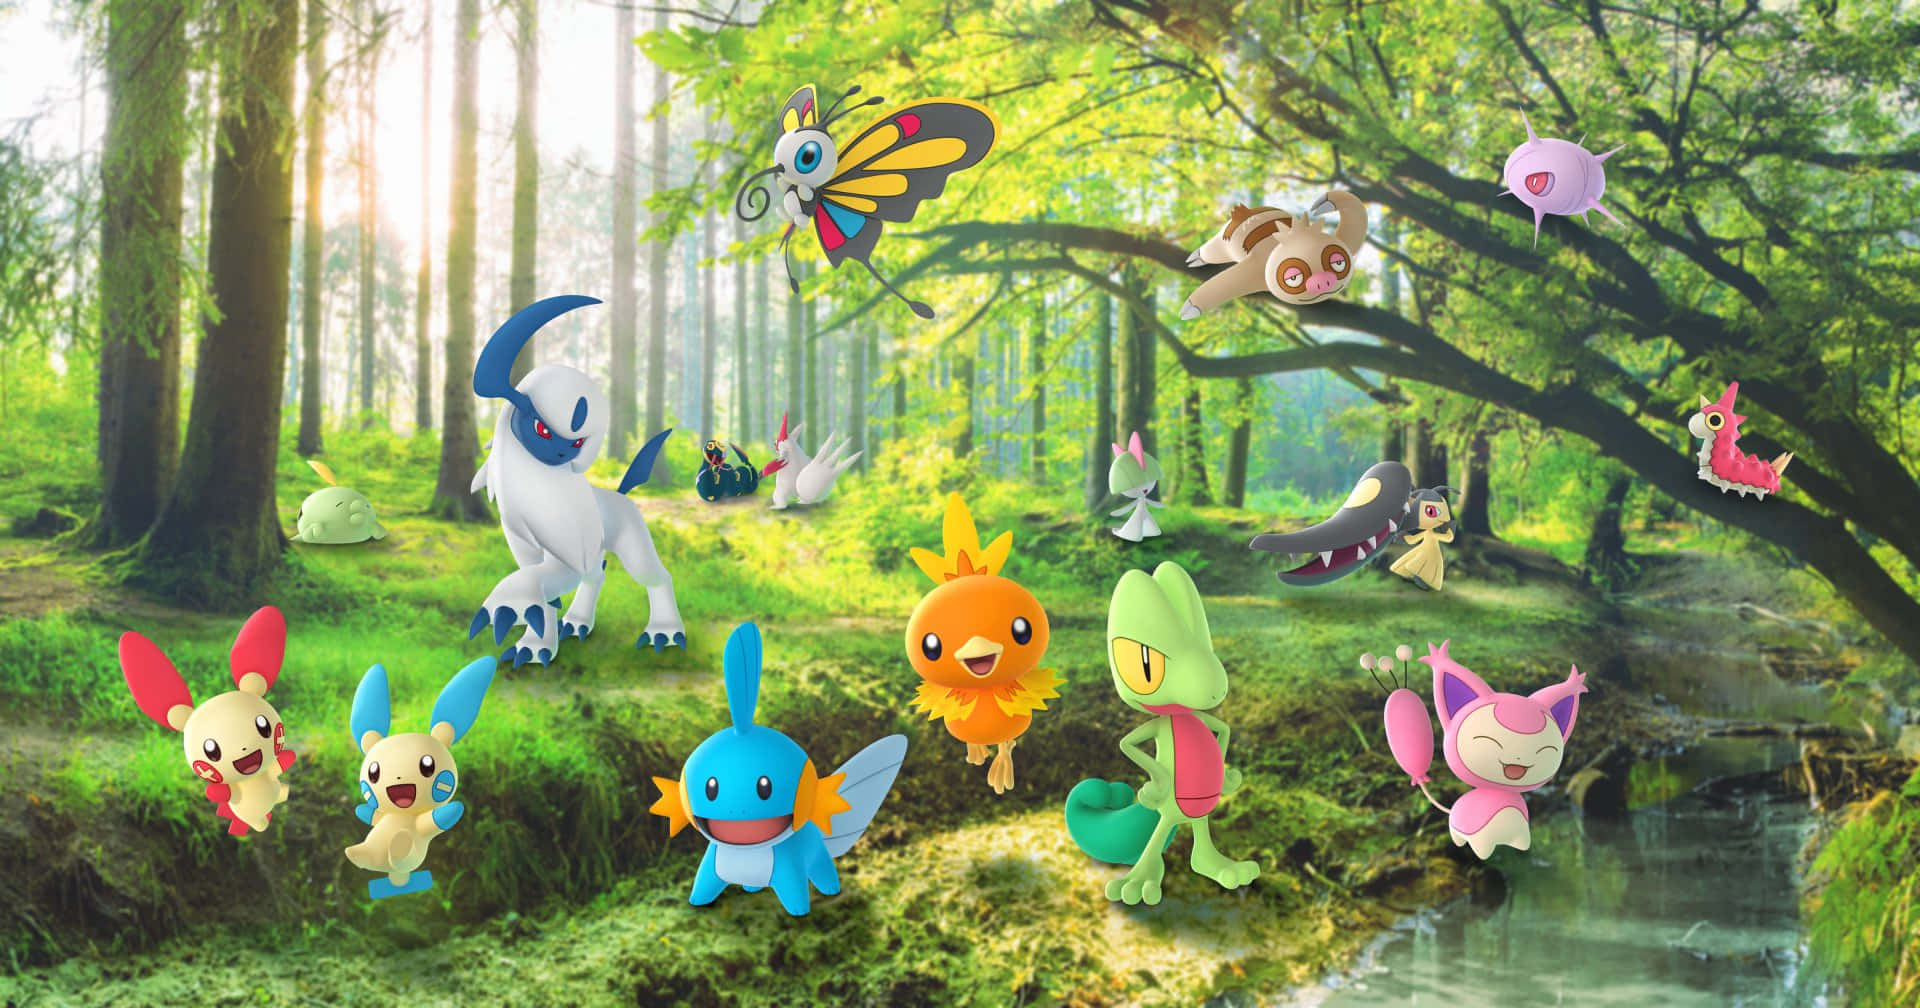 Torchic With Other Pokemon In Forest Wallpaper